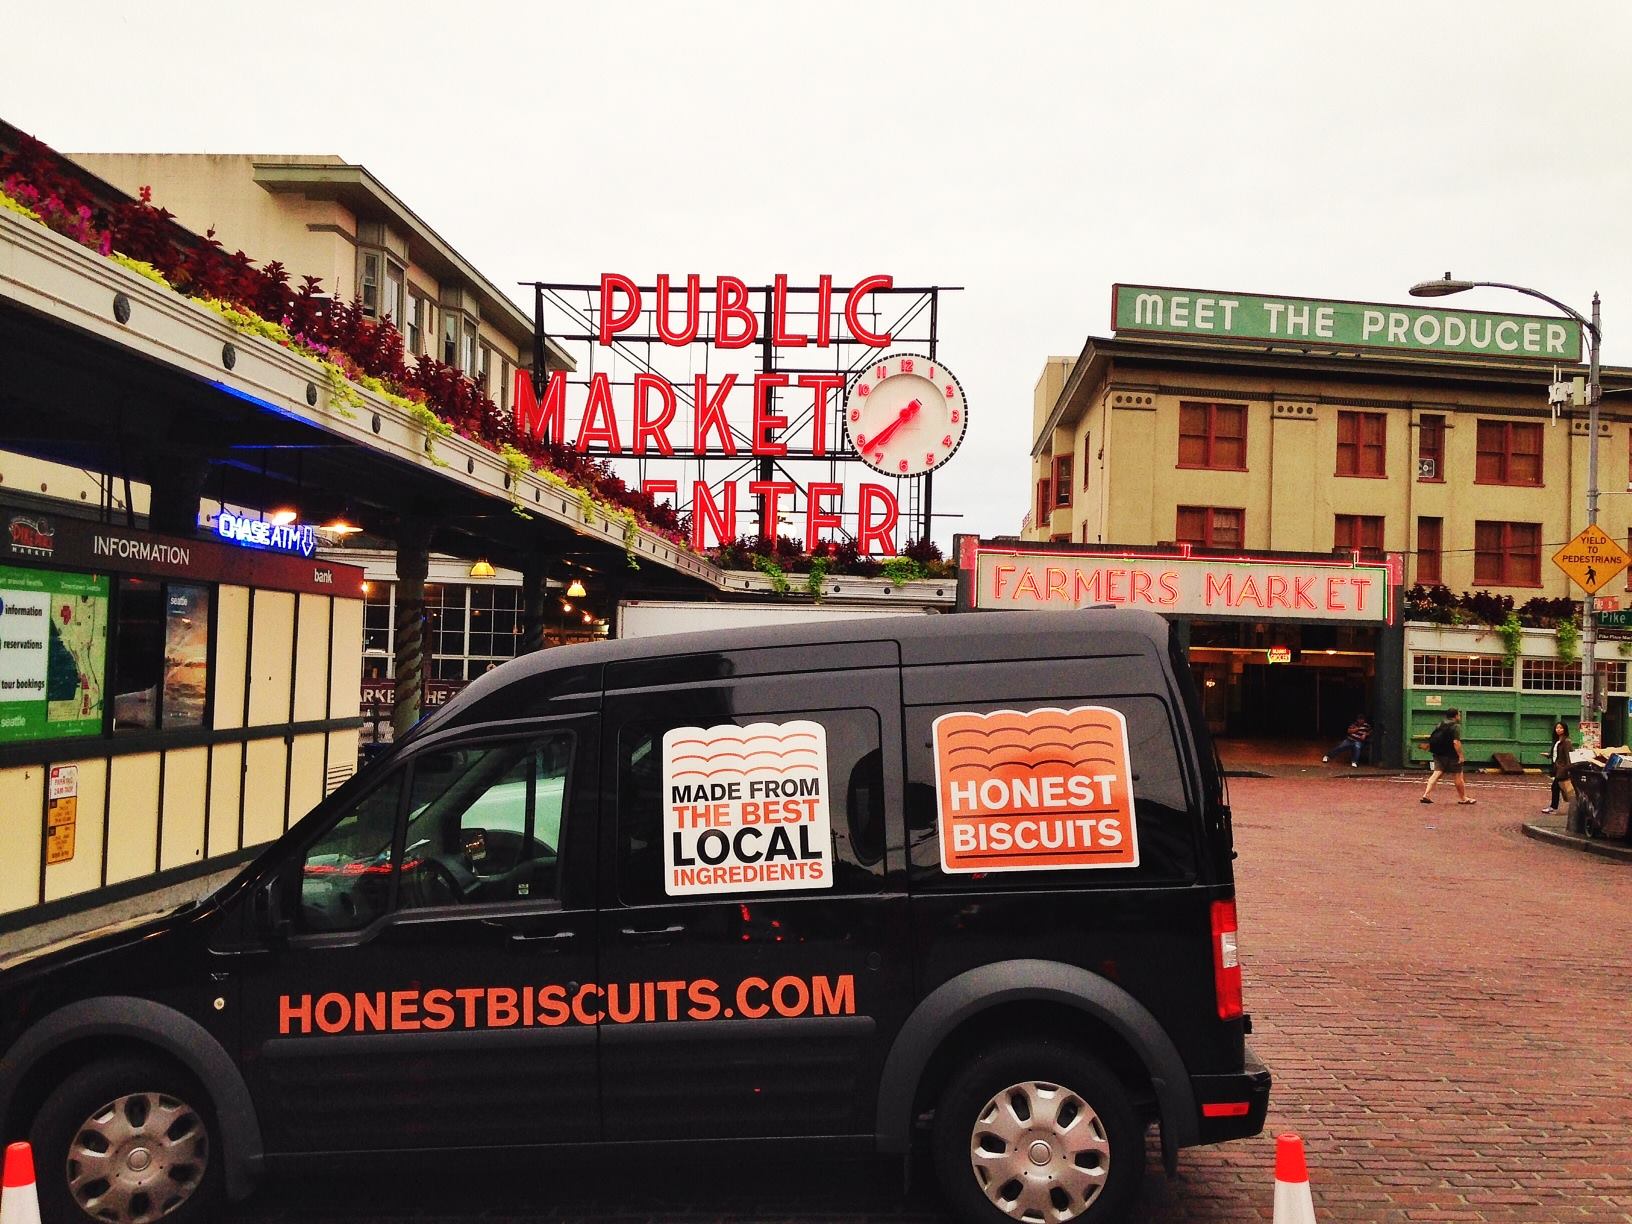 Honest Biscuits, opening soon at Pike Place